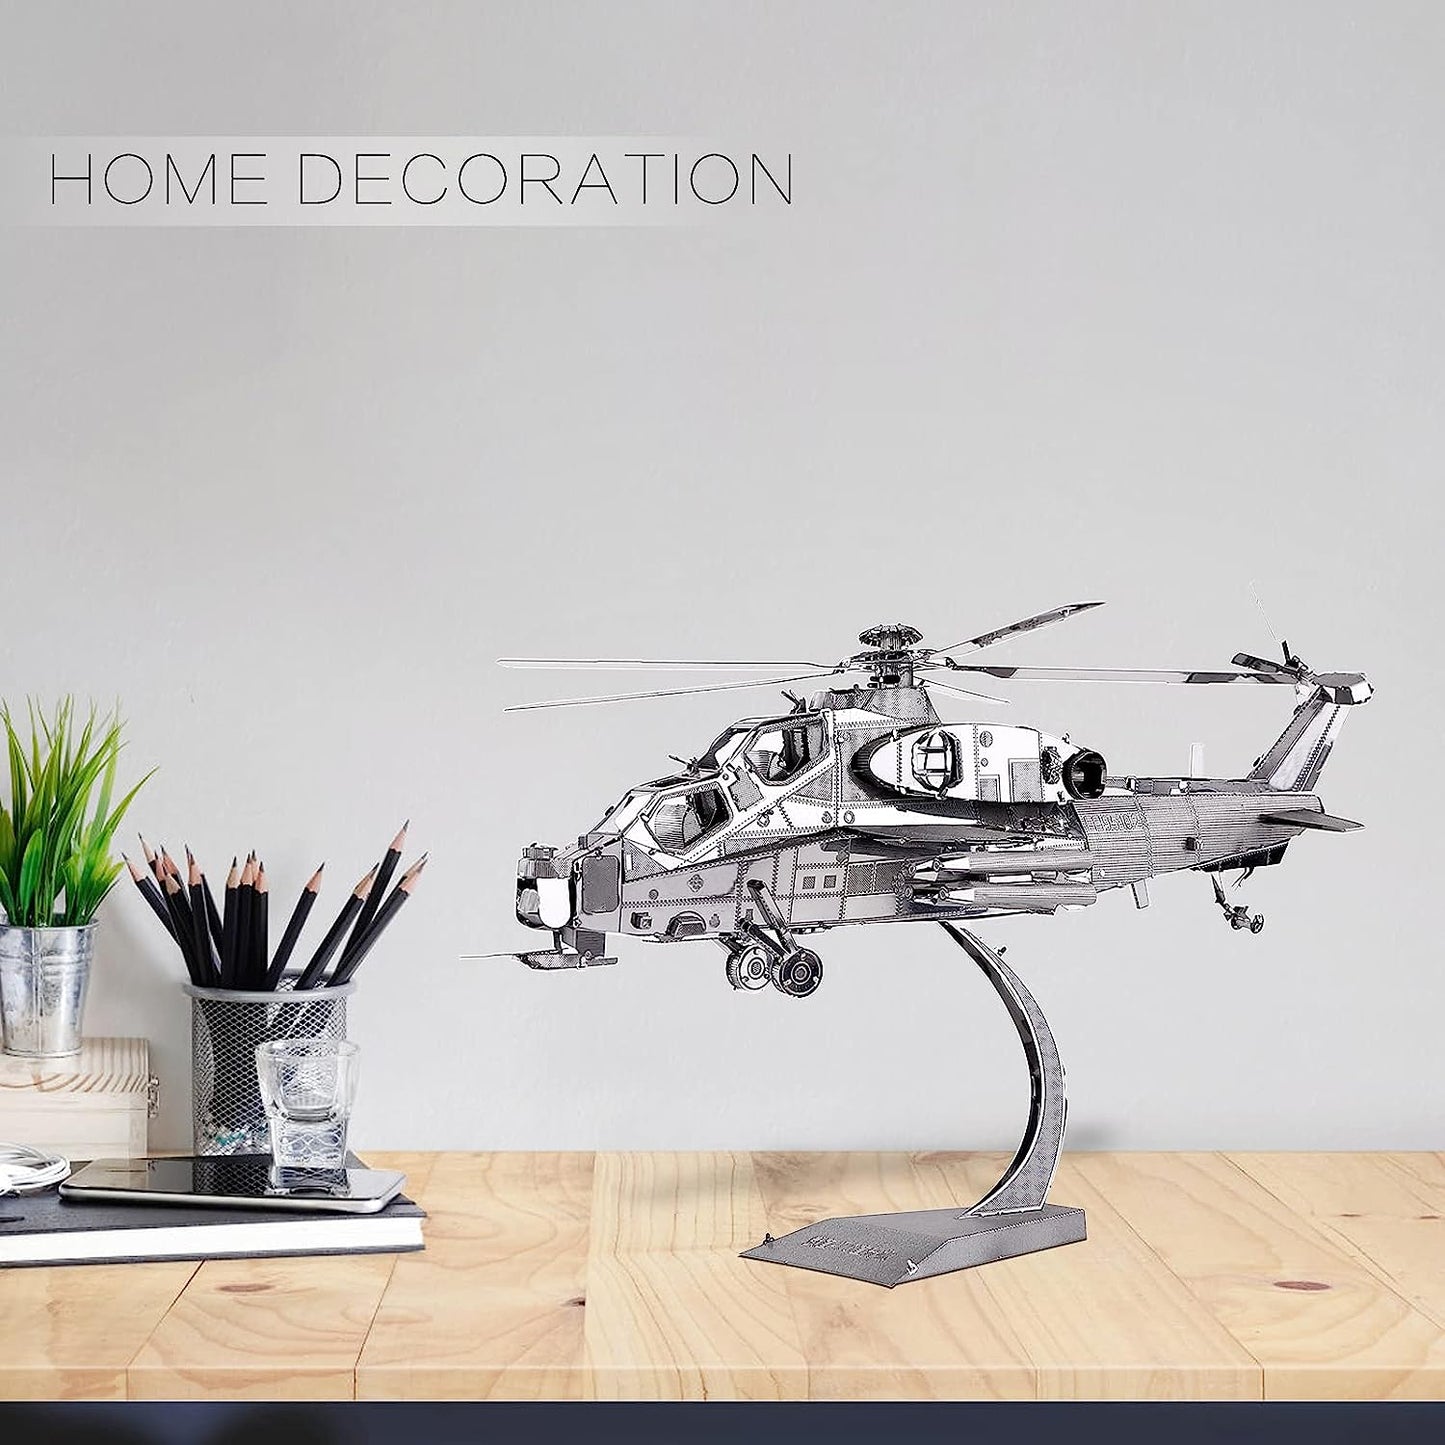 Piececool Metal Earth 10 Helicopter Airplane Models, 122 Pcs